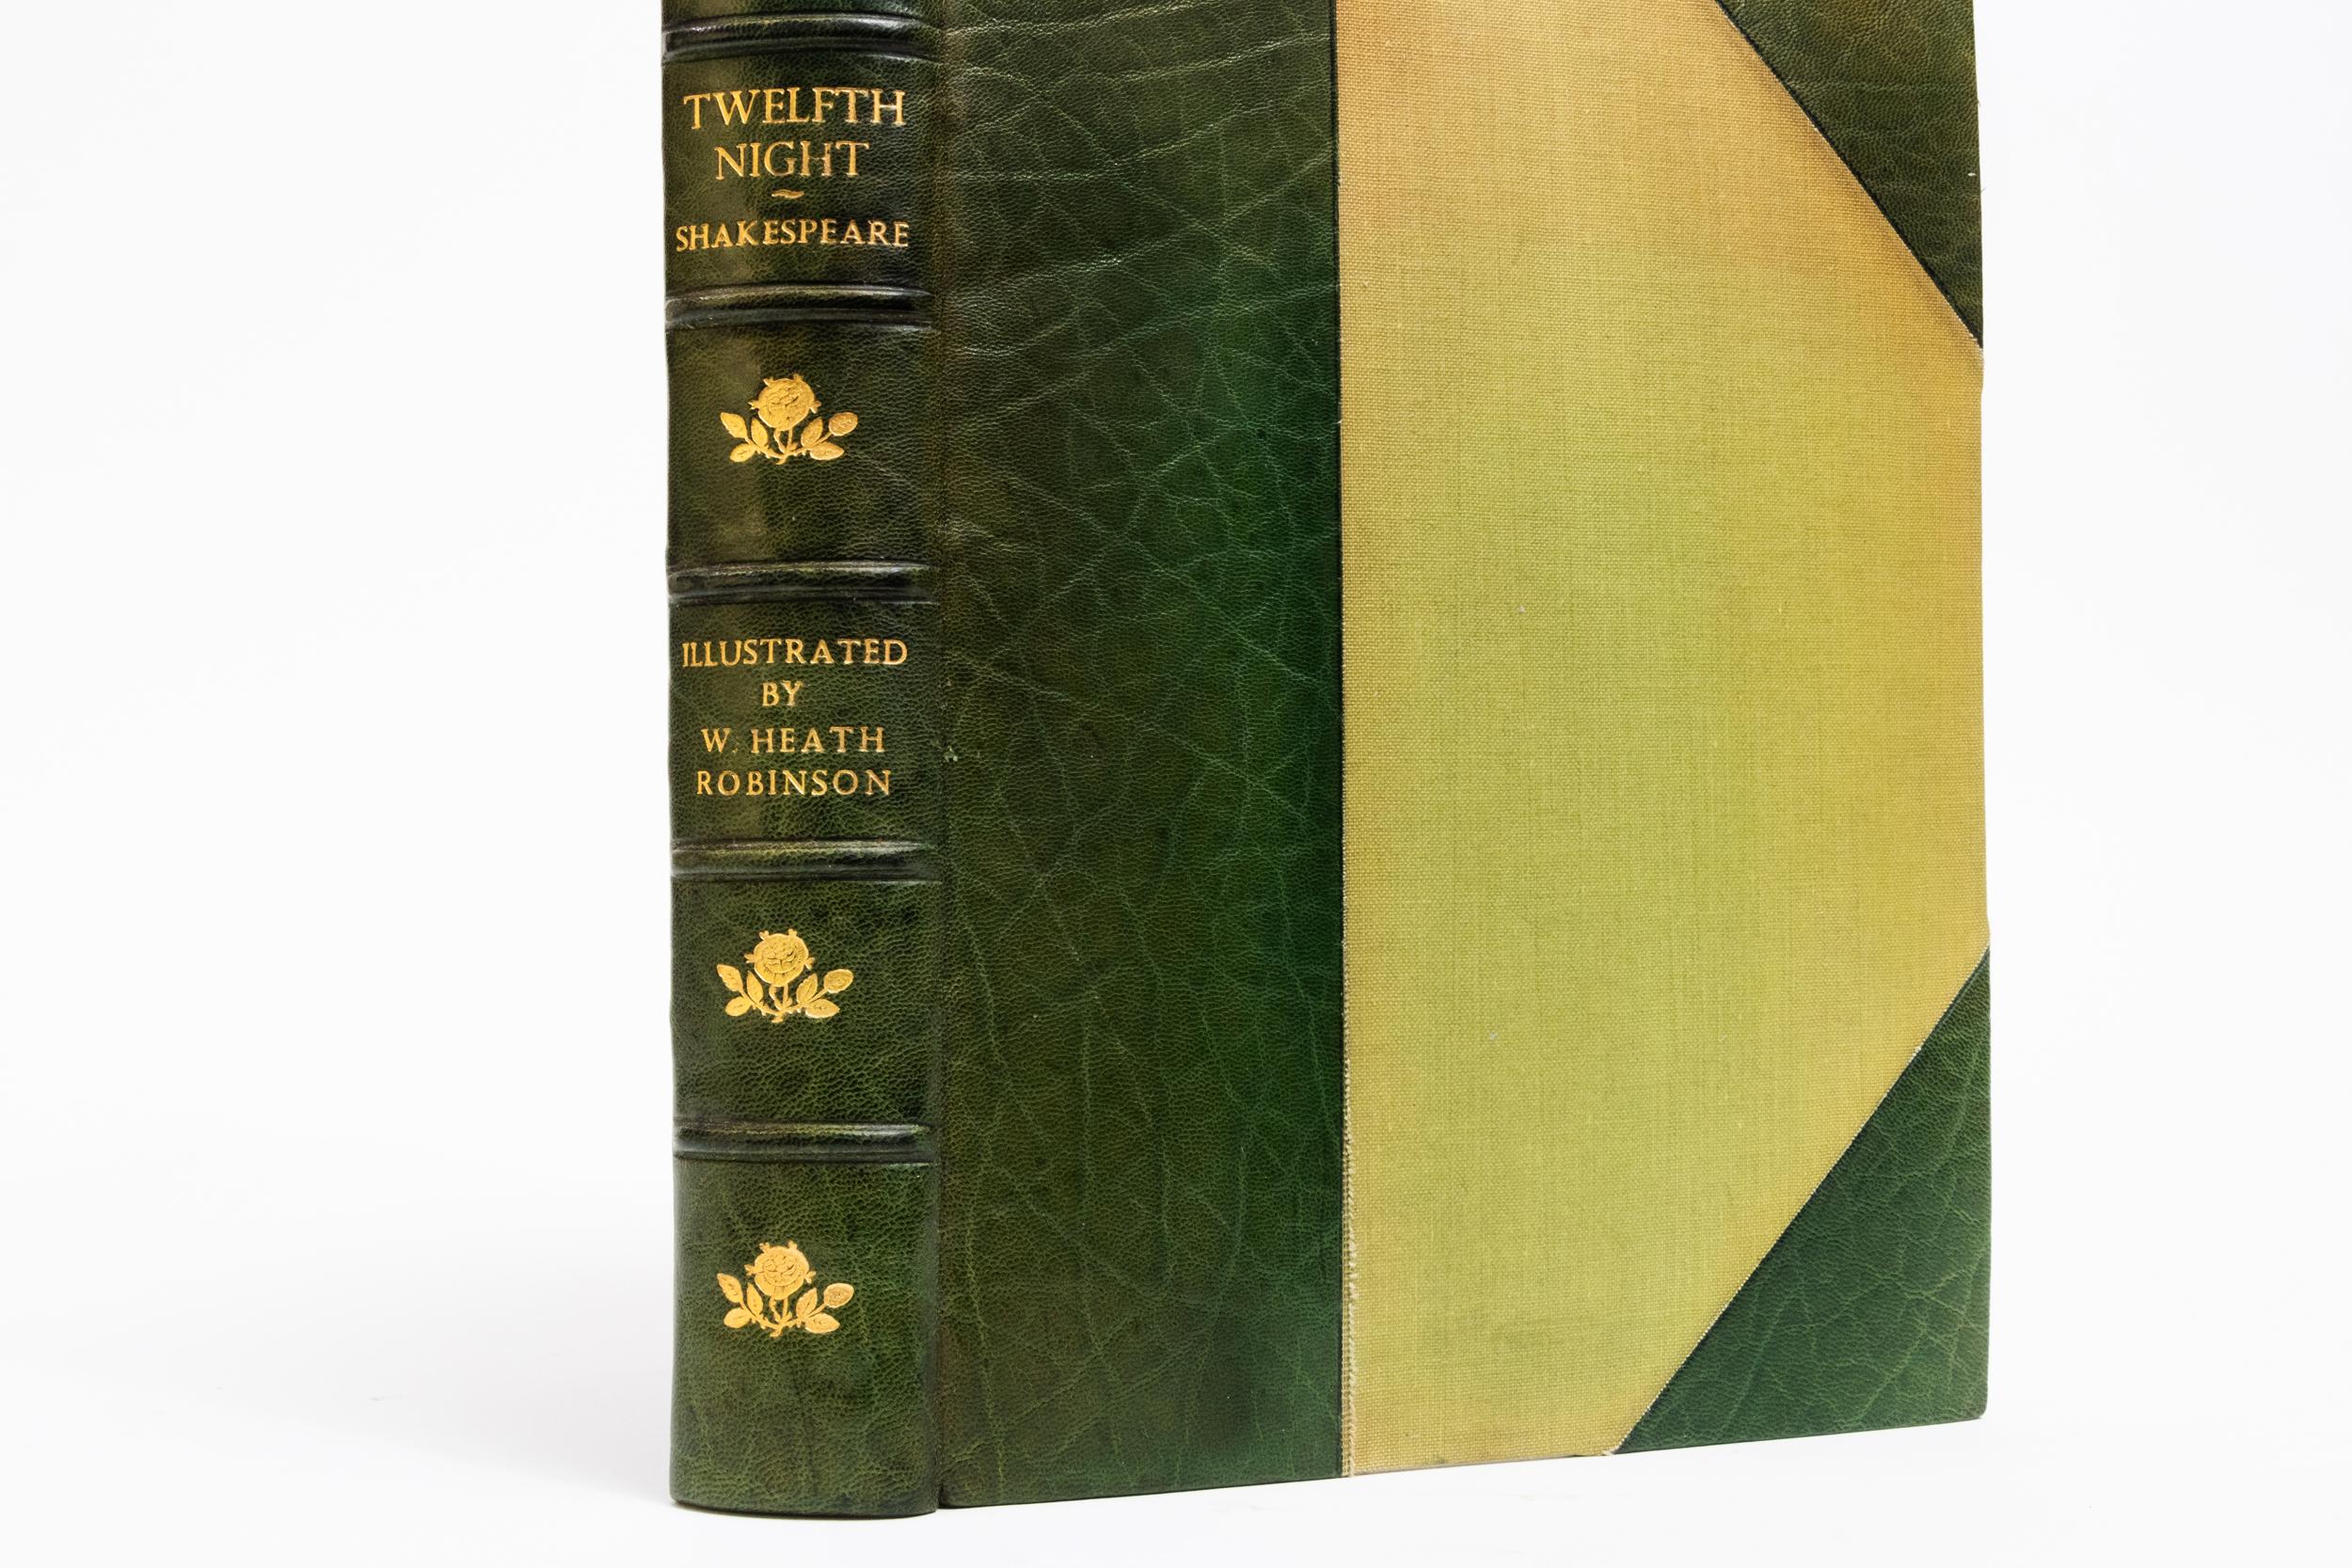 1 Volume. William Shakespeare, Twelfth Night. Bound in green morocco. Linen boards. Top edges gilt. Raised bands. Cork endpapers. Floral gilt symbols on spines. Bound by Heath Bayntun. Illustrated. Published: London; Hodder & Stoughton Publishers.